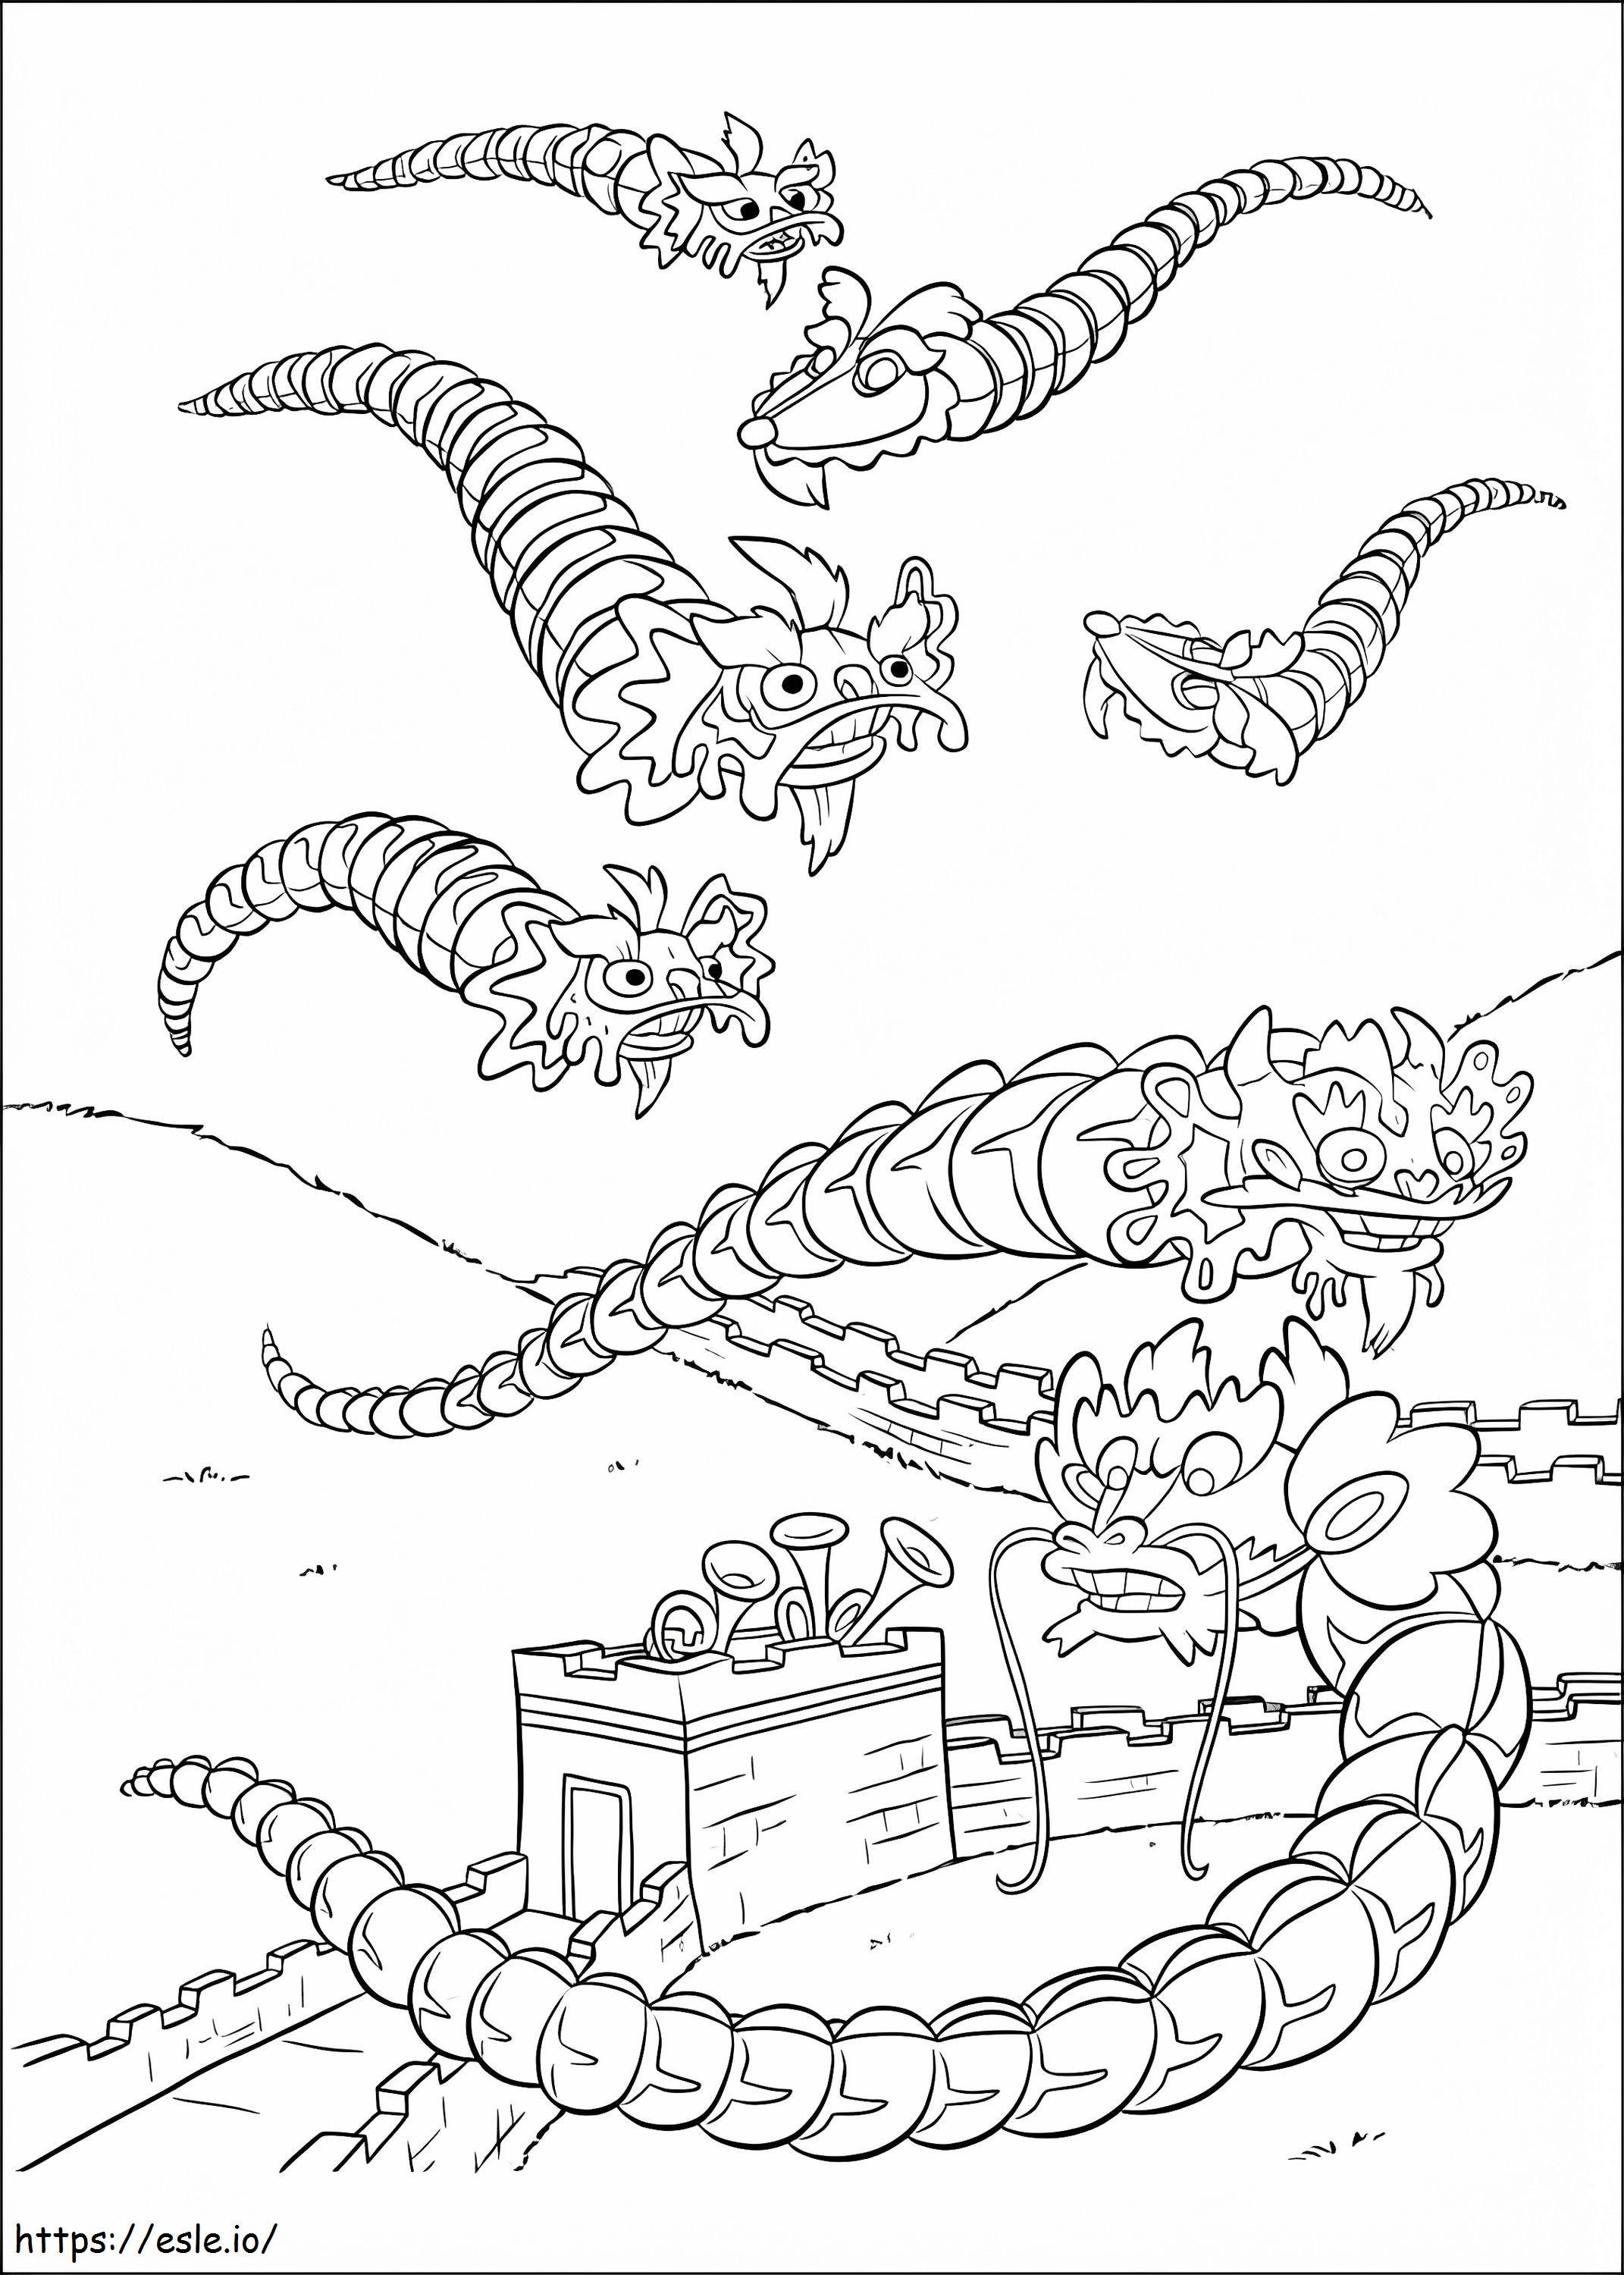 Little Einsteins 11 coloring page